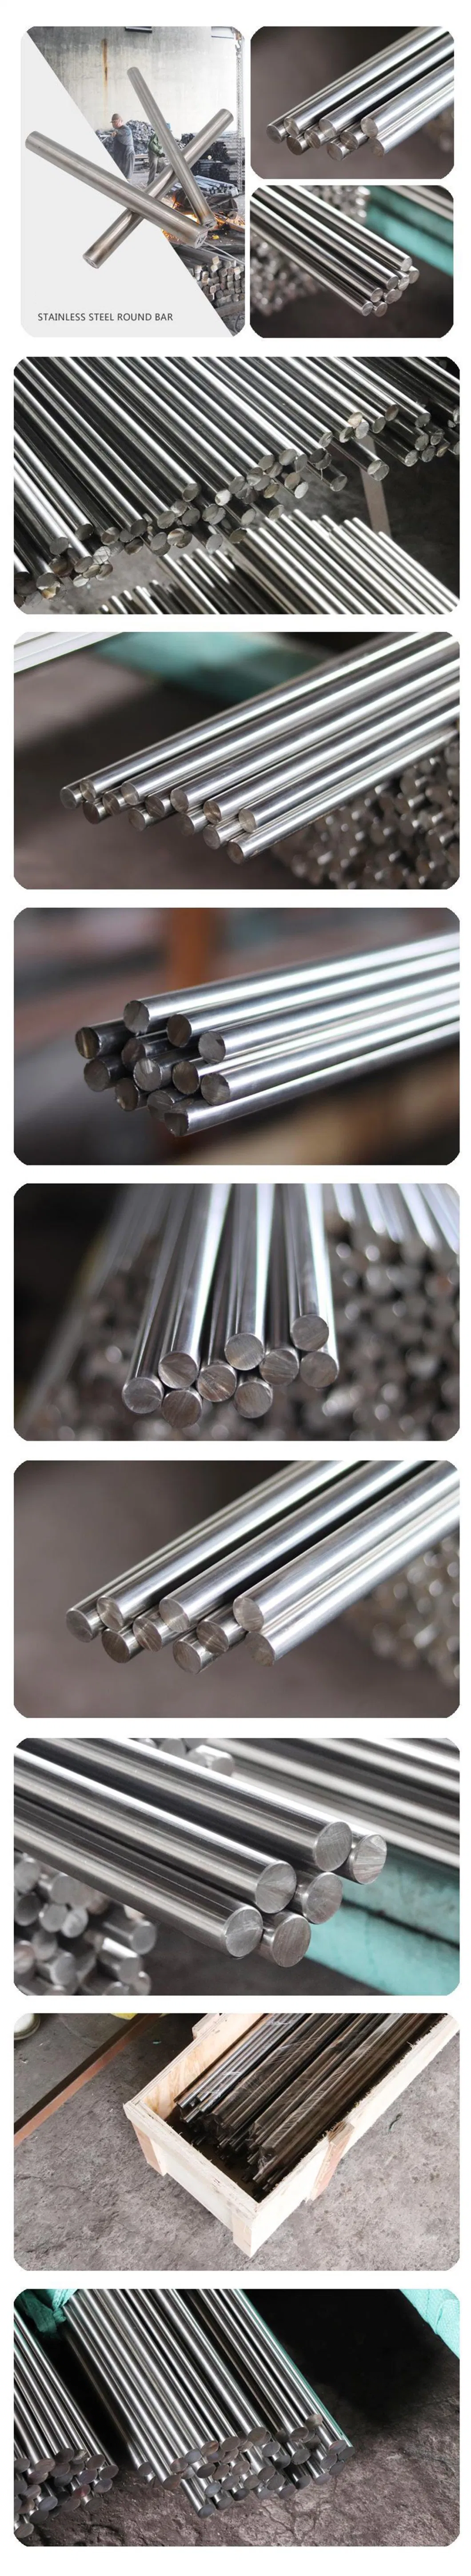 Sales 17-4pH Solid Solution Tempering Round Rod /630 Precipitation-Hardened Stainless Steel Rod